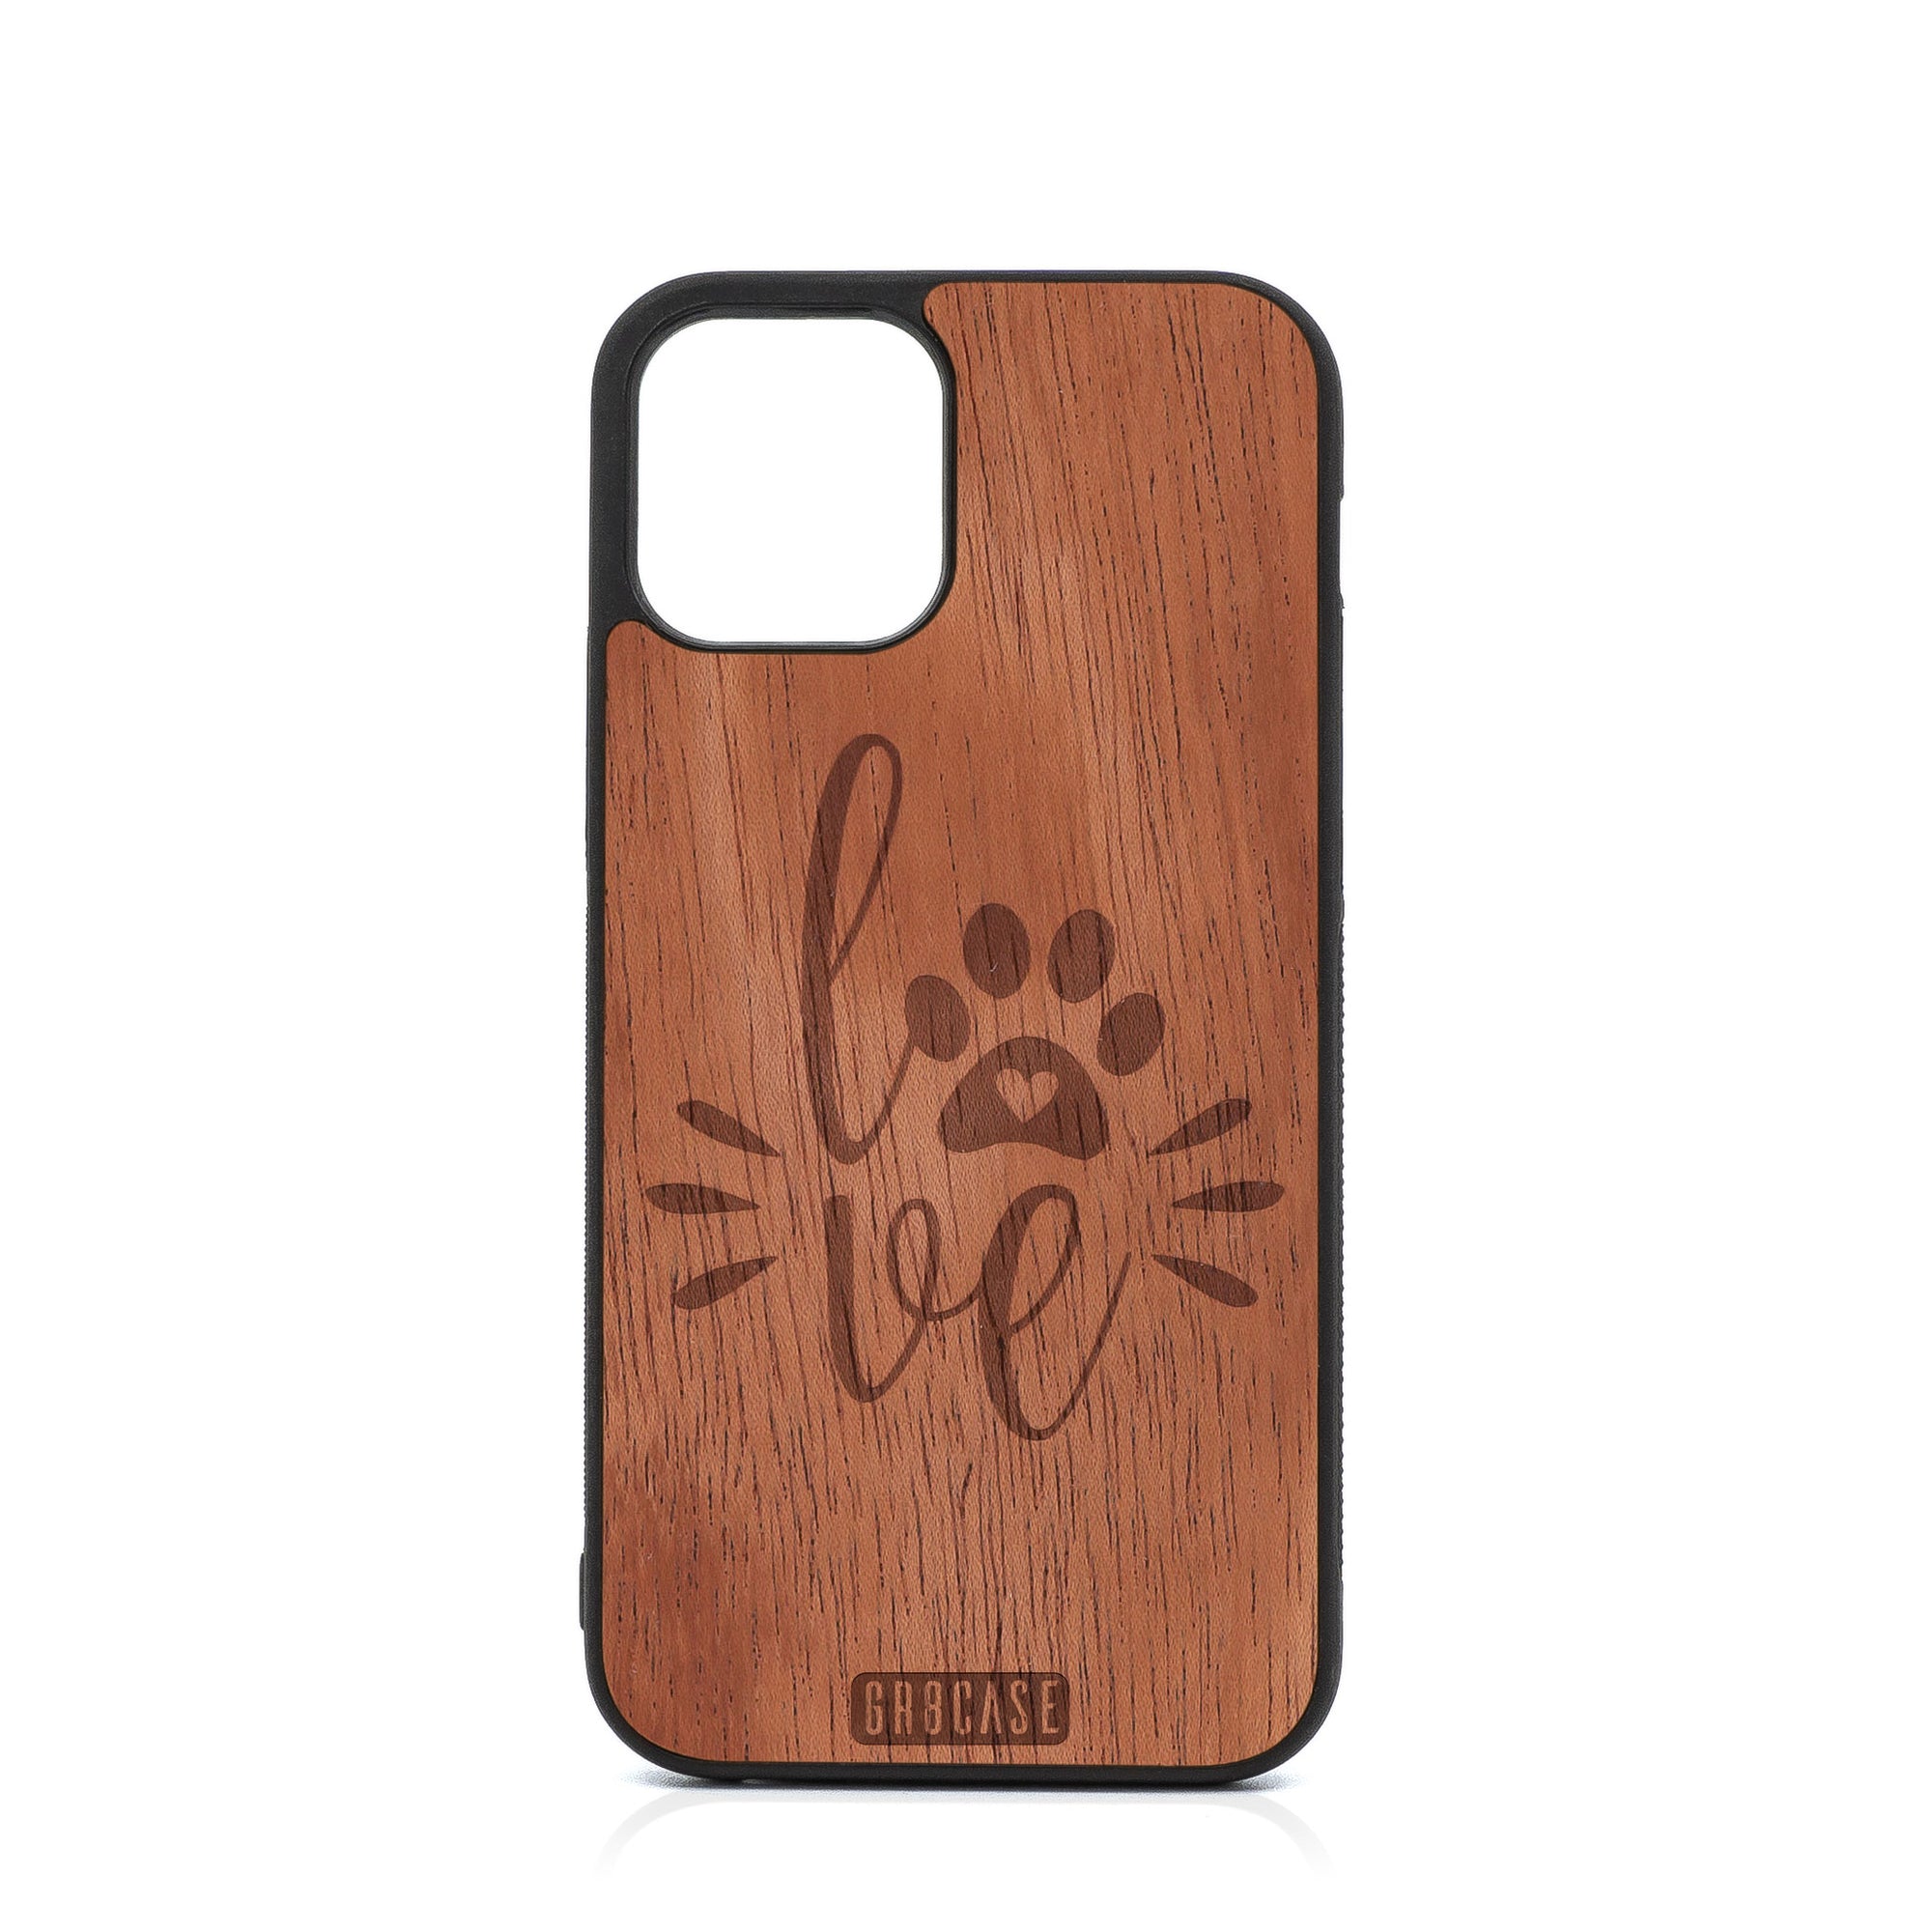 Paw Love Design Wood Case For iPhone 12